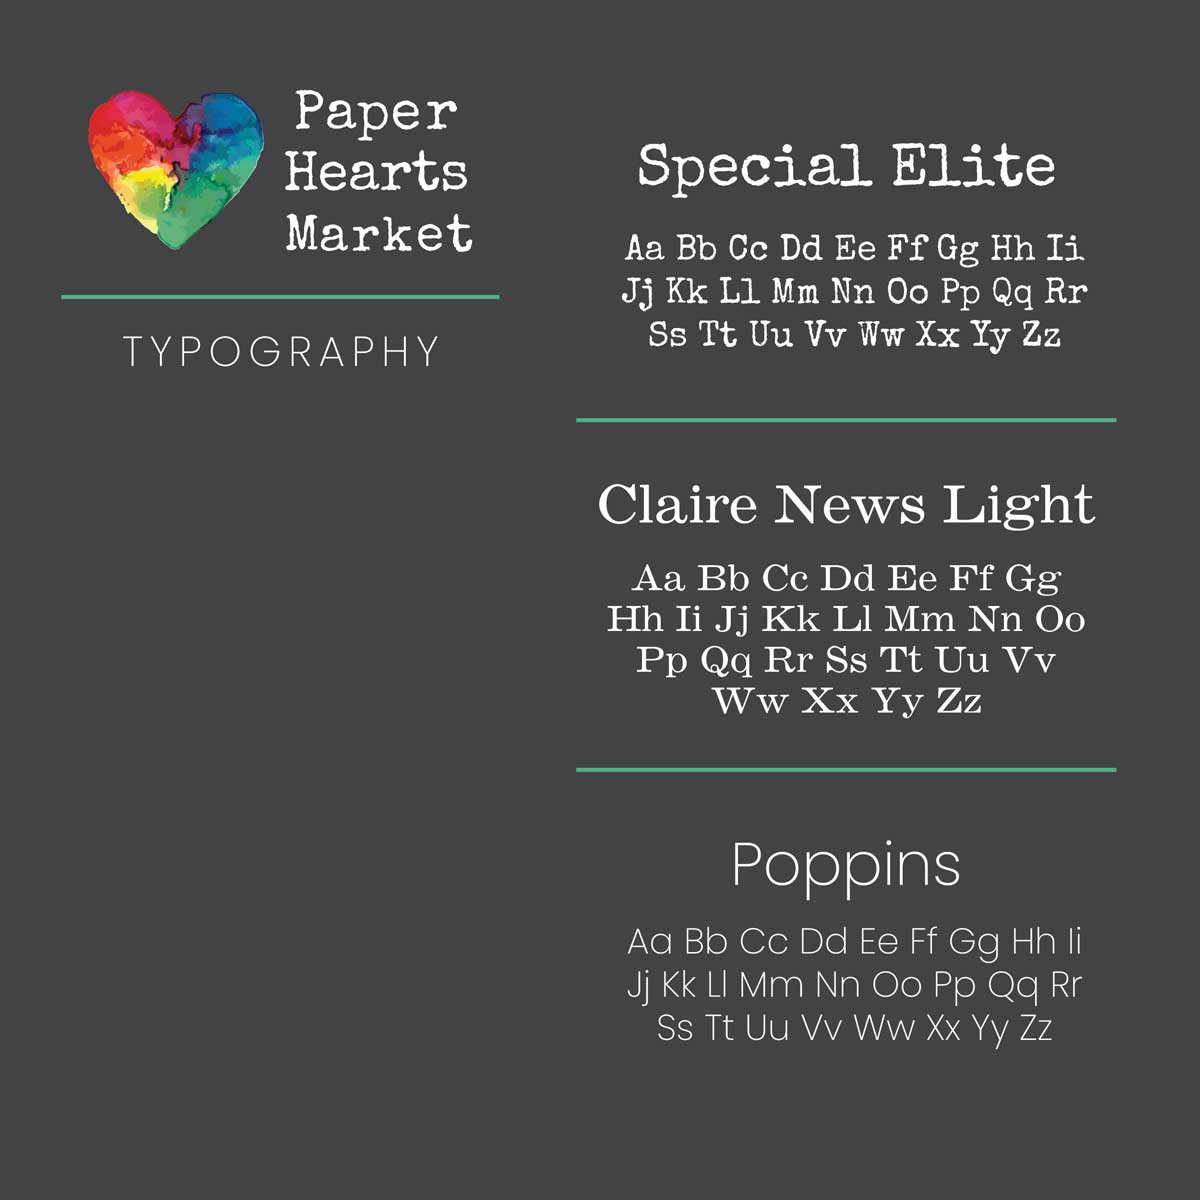 Typography selection for Paper Hearts Market